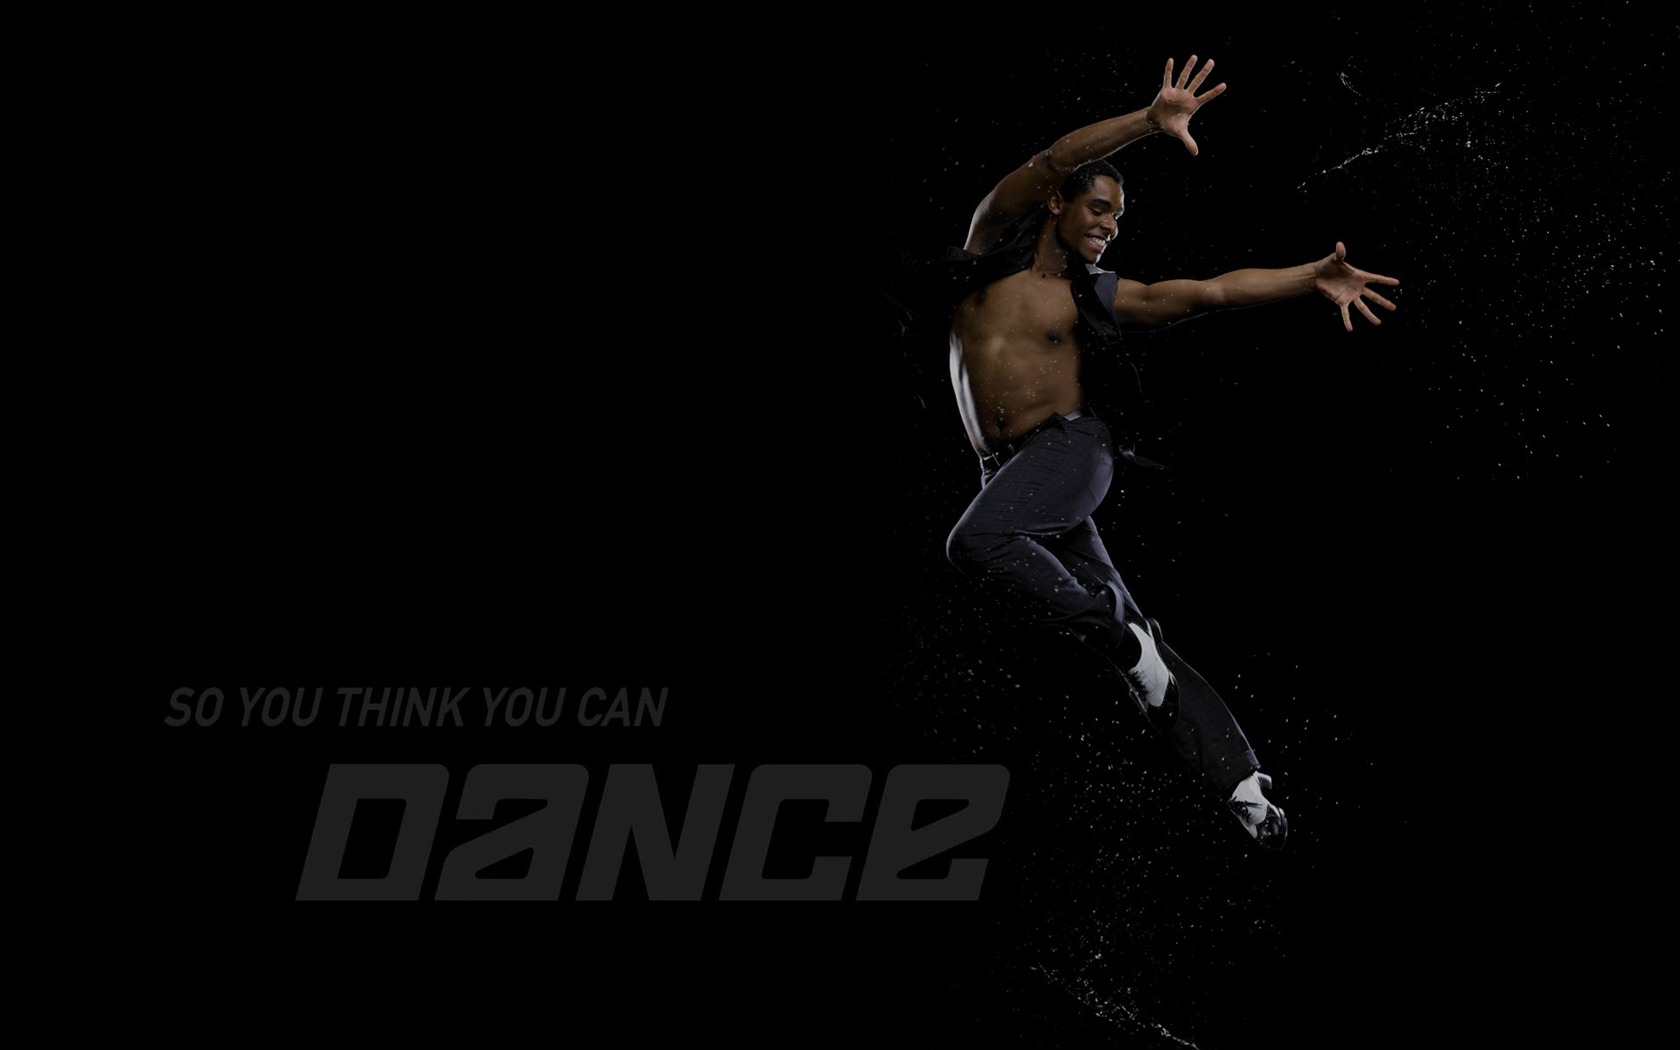 So You Think You Can Dance 舞林争霸 壁纸(二)20 - 1680x1050